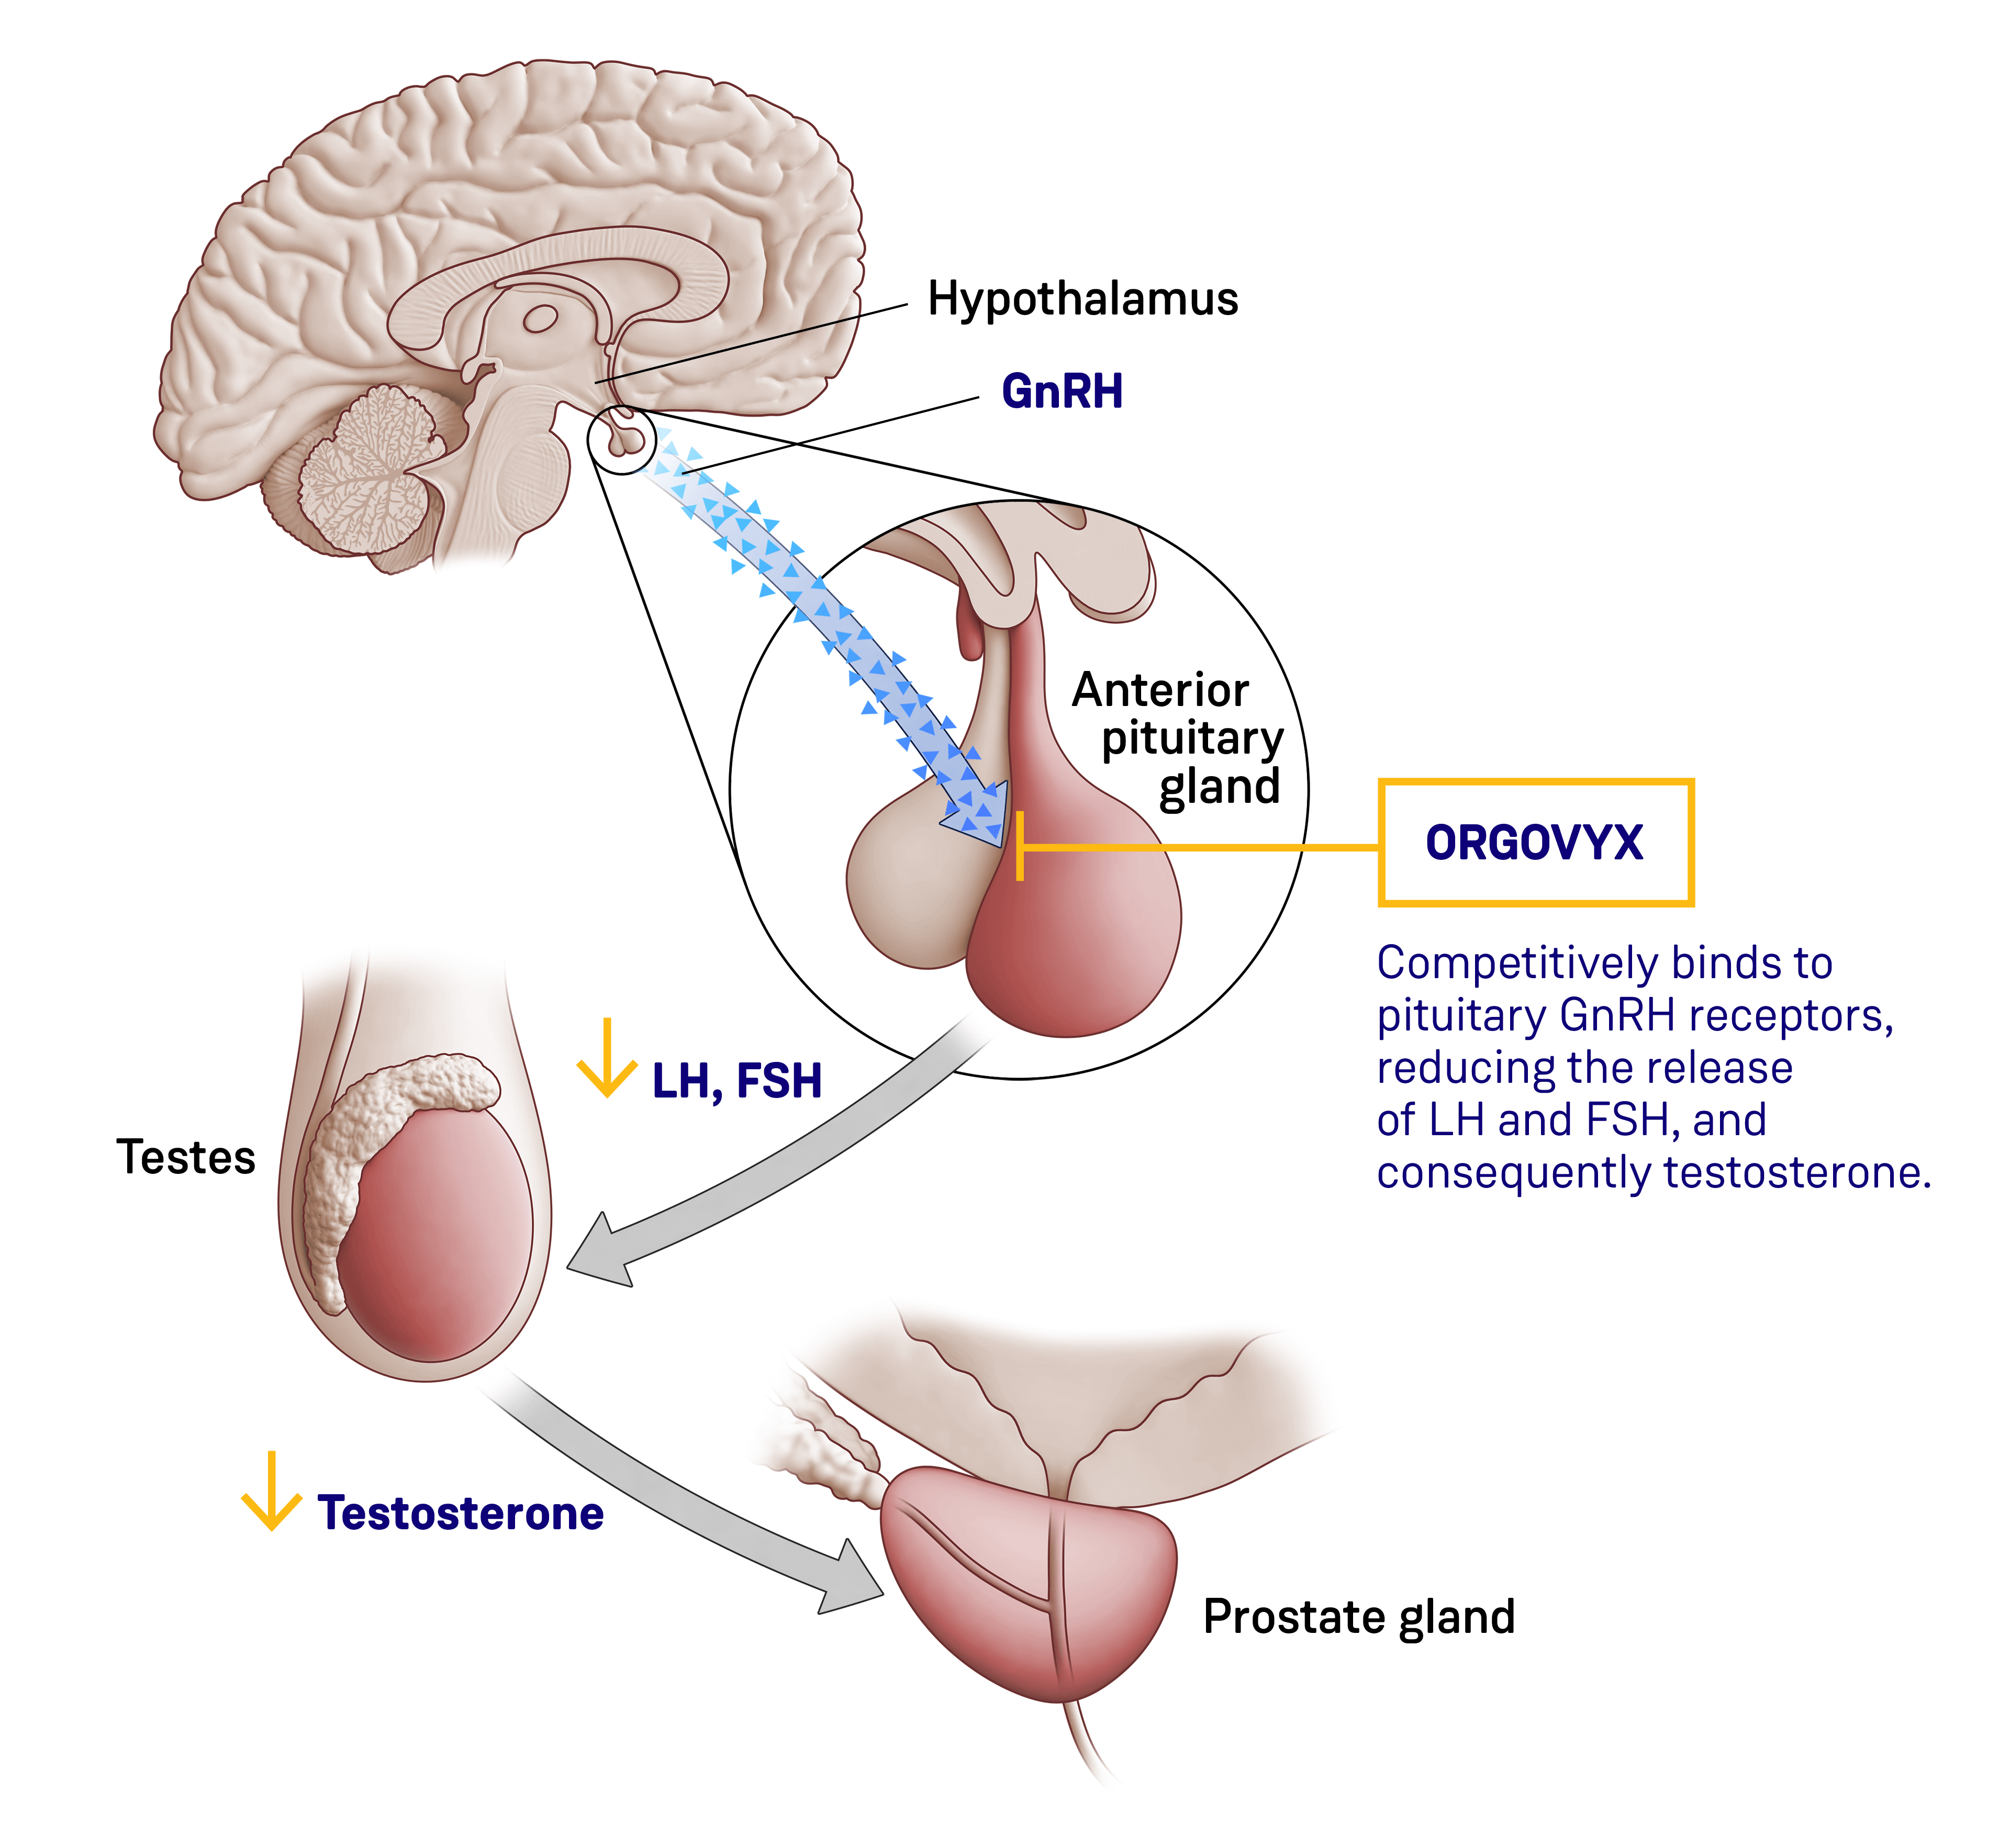 Illustration showing the mechanism of action for ORGOVYX